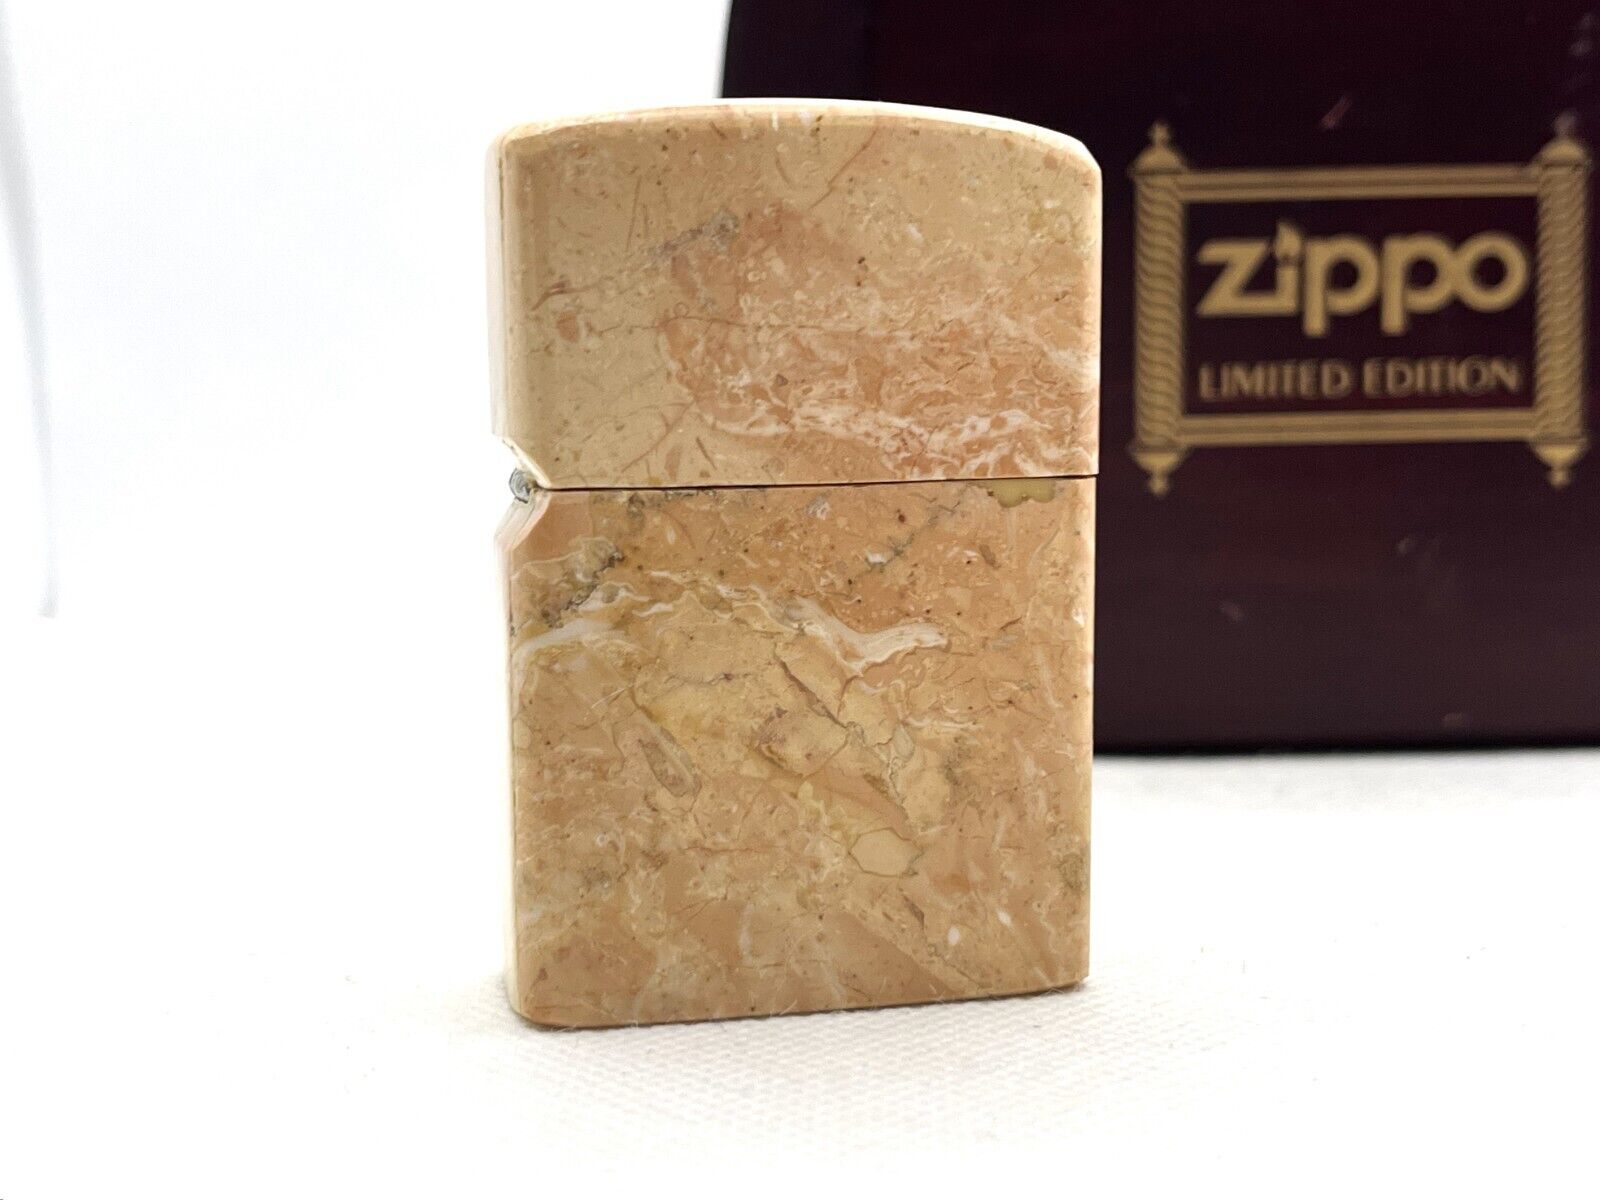 Unused Auth ZIPPO Limited Edition Marble Stone Case Lighter Salmon Pink w Box